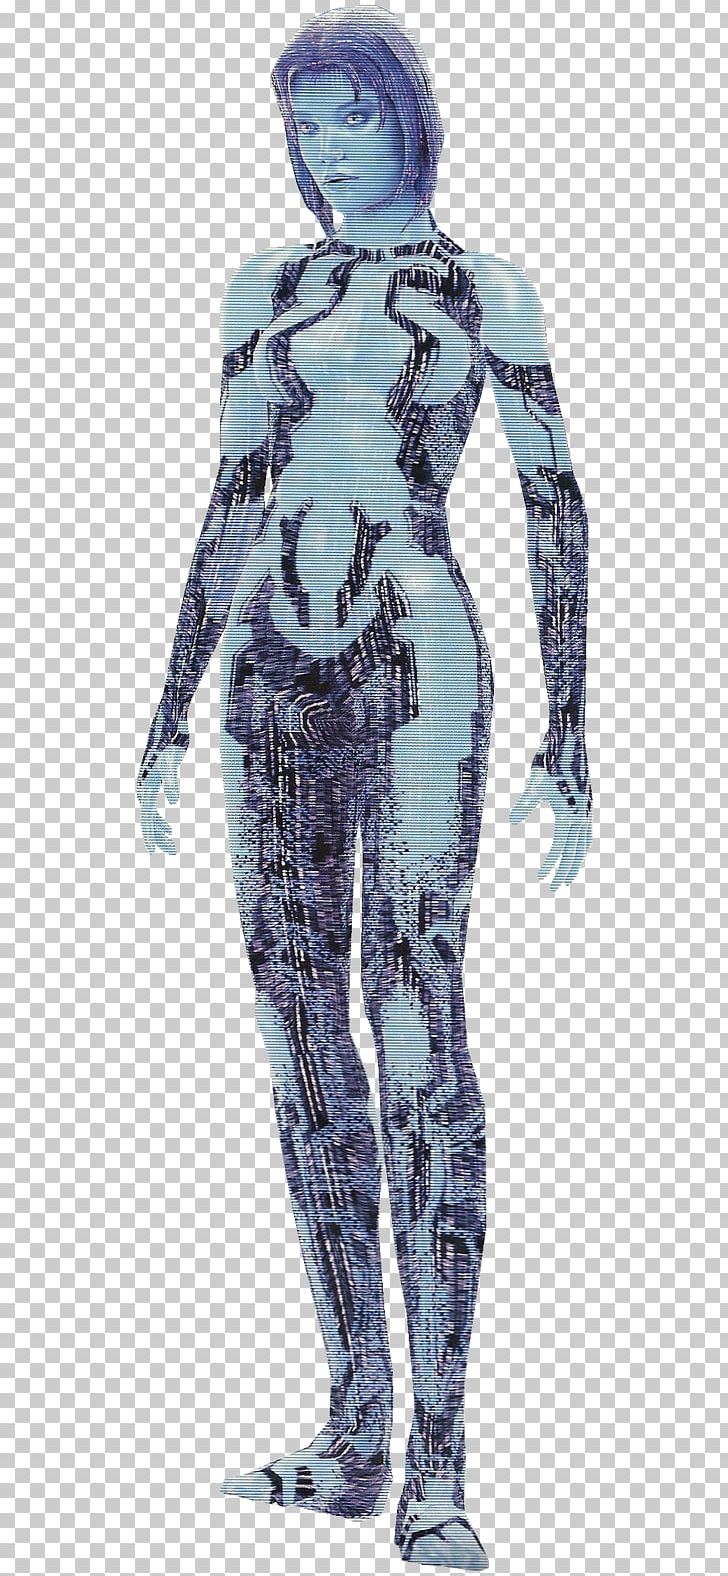 Halo: Combat Evolved Halo 3: ODST Halo 4 Halo 2 PNG, Clipart, Celebrities, Cortana, Costume, Costume Design, Fictional Character Free PNG Download